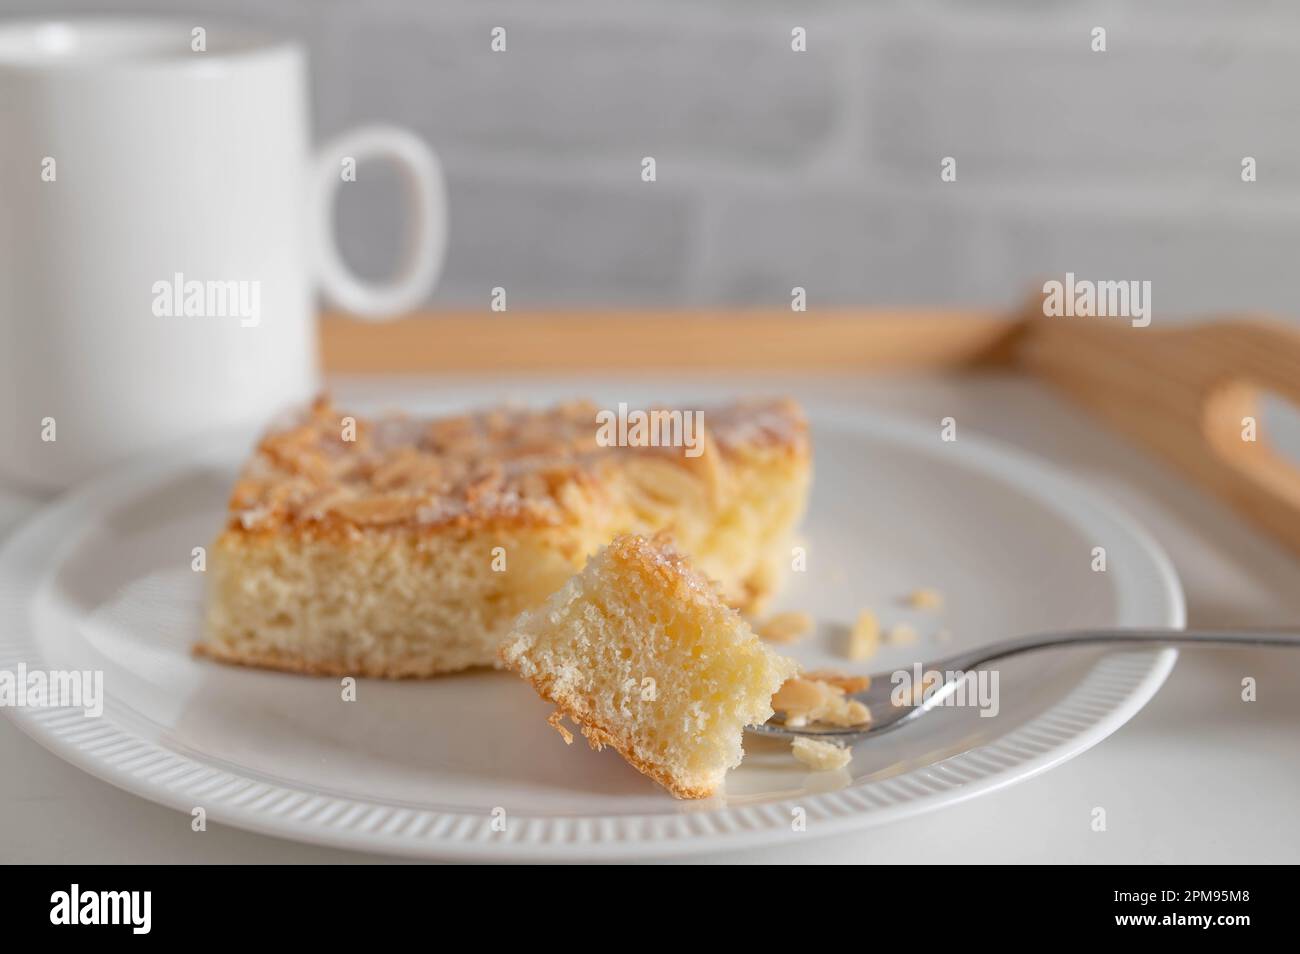 Butter cake with almond, sugar topping. Traditional german yeast cake served on a plate Stock Photo